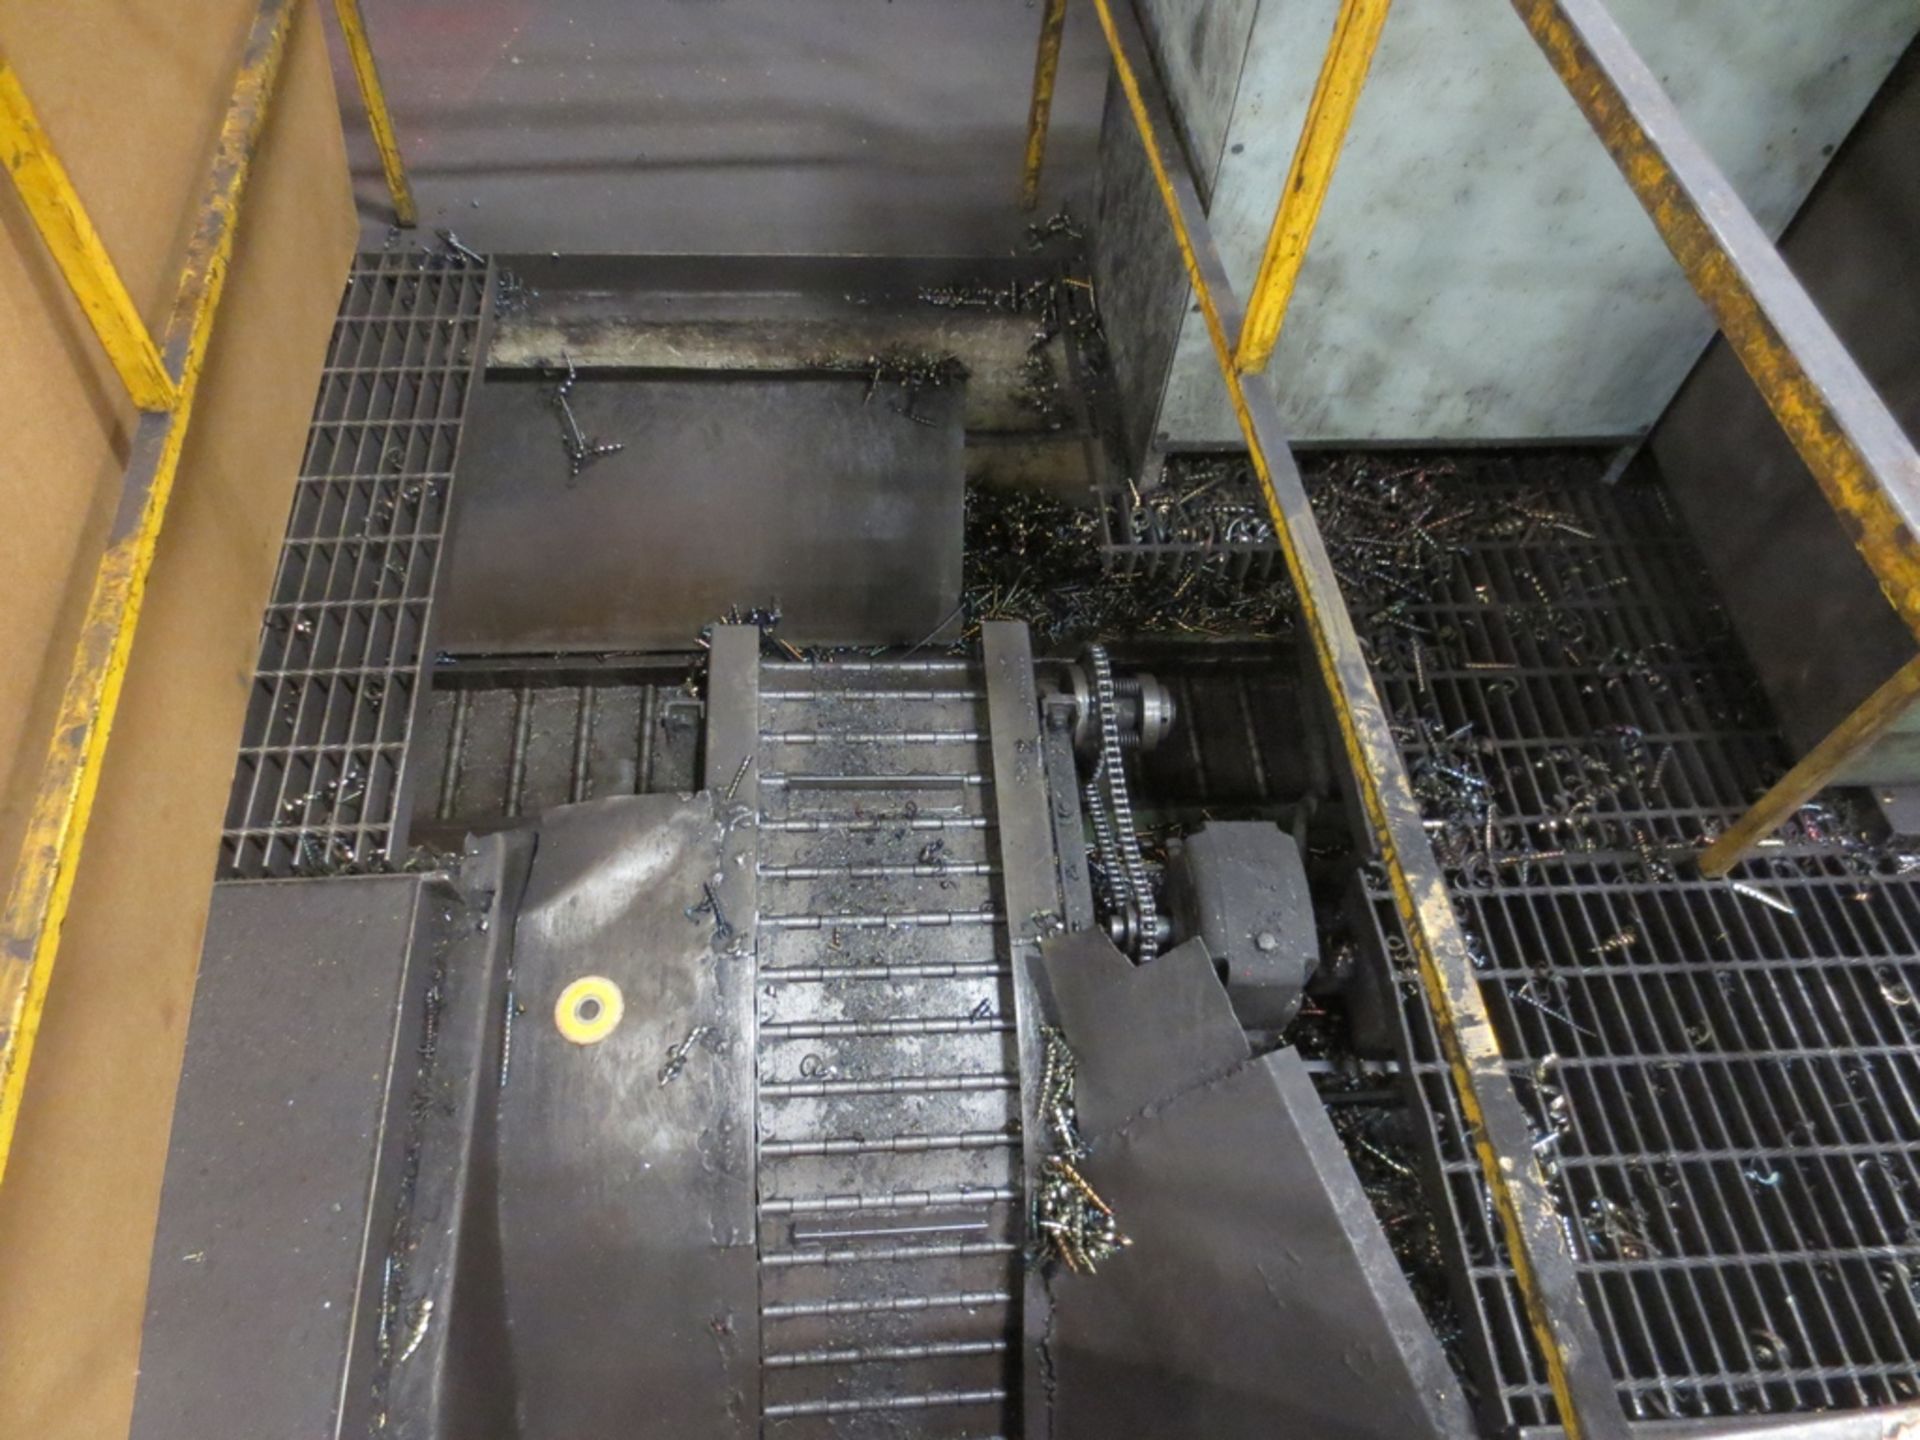 CHIP CONVEYOR SYSTEM WITH ABOVE & UNDERGROUND CONVEYORS, GRATES NOT INCLUDED - Image 9 of 11